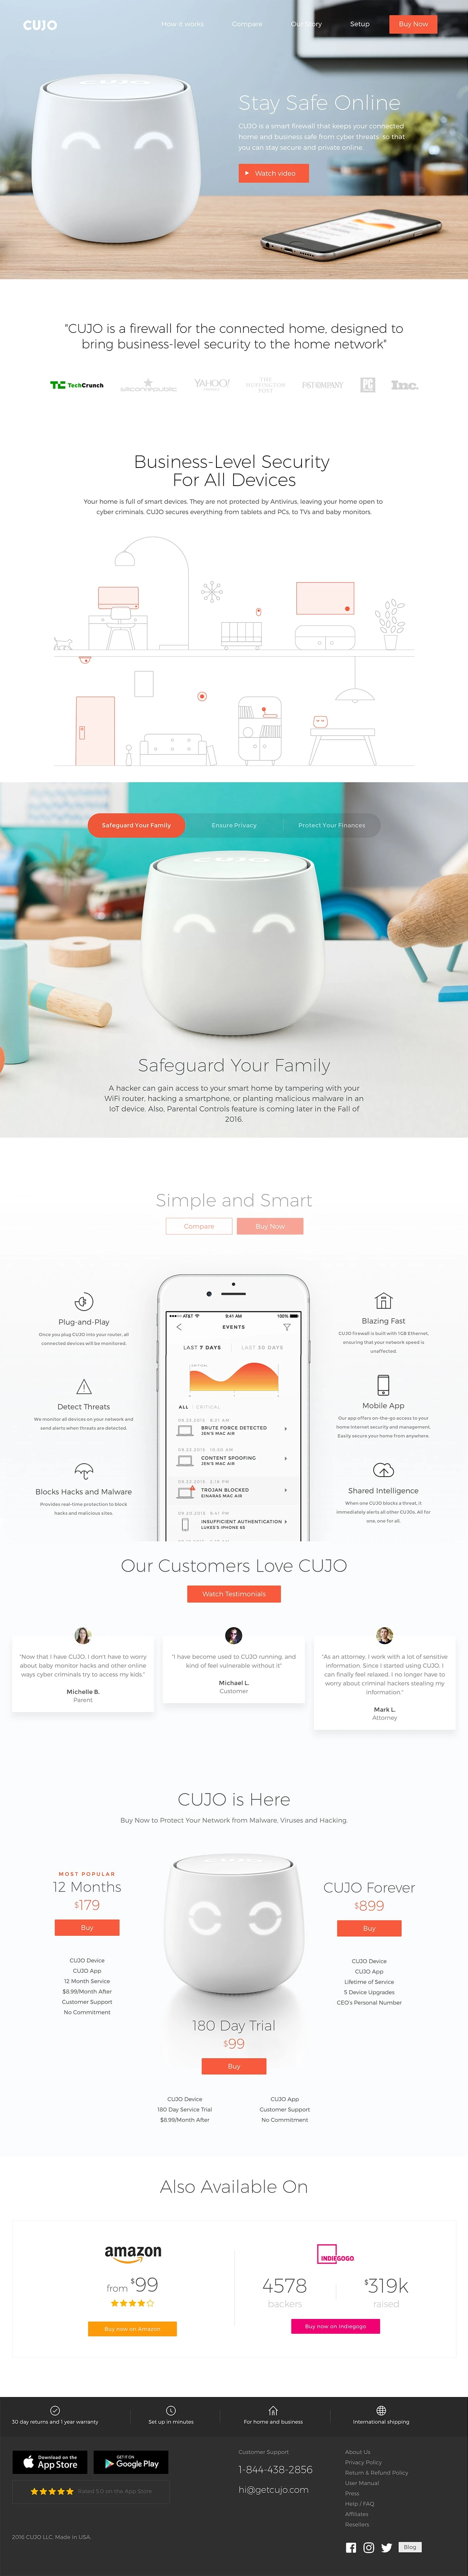 CUJO Landing Page Example: CUJO is a smart firewall that keeps your connected home and business safe from cyber threats  so that you can stay secure and private online.